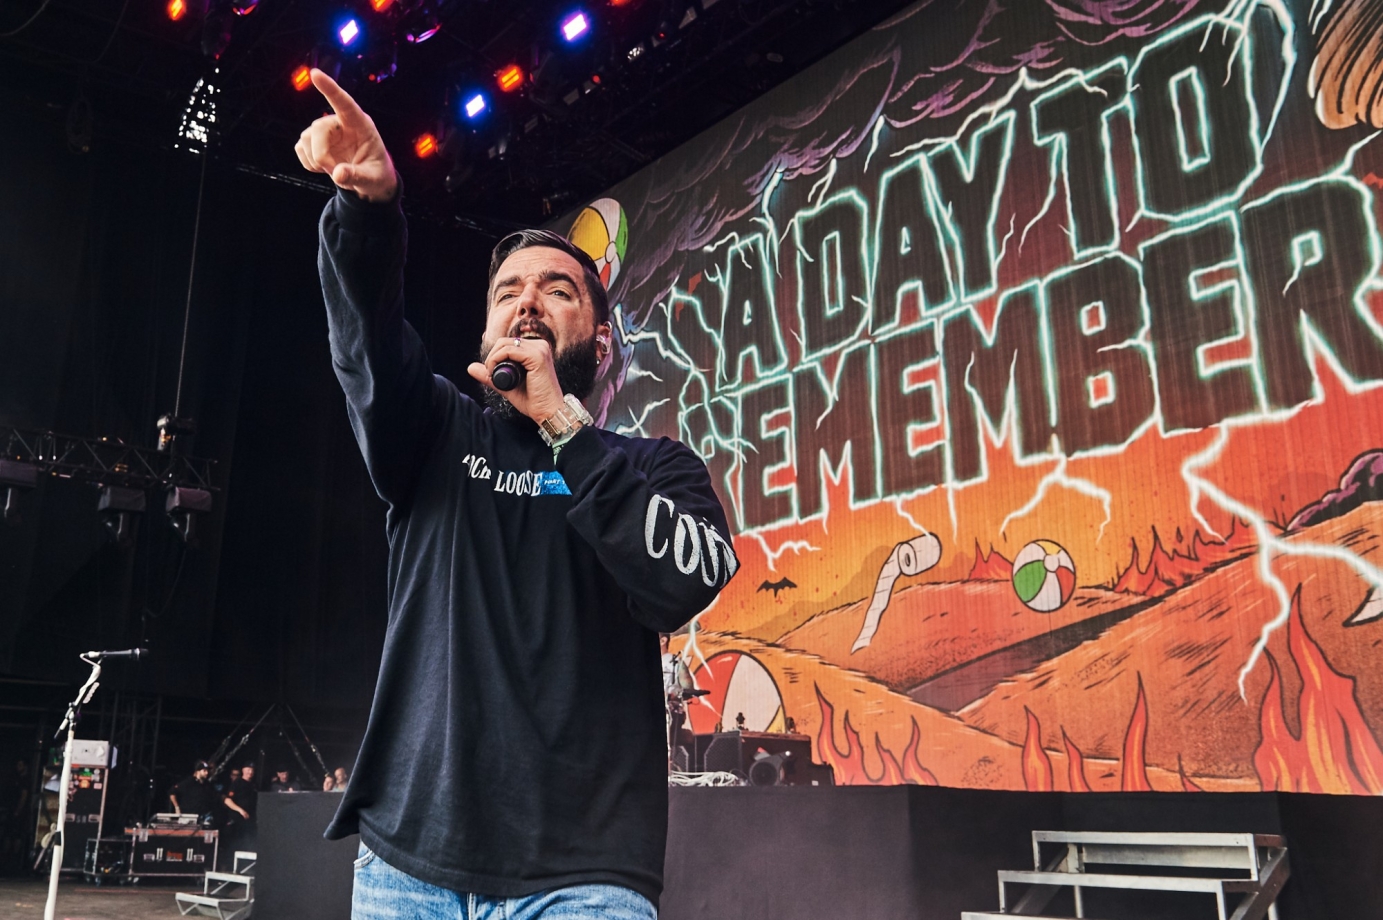 Photography for A Day To Remember by justinetrickett